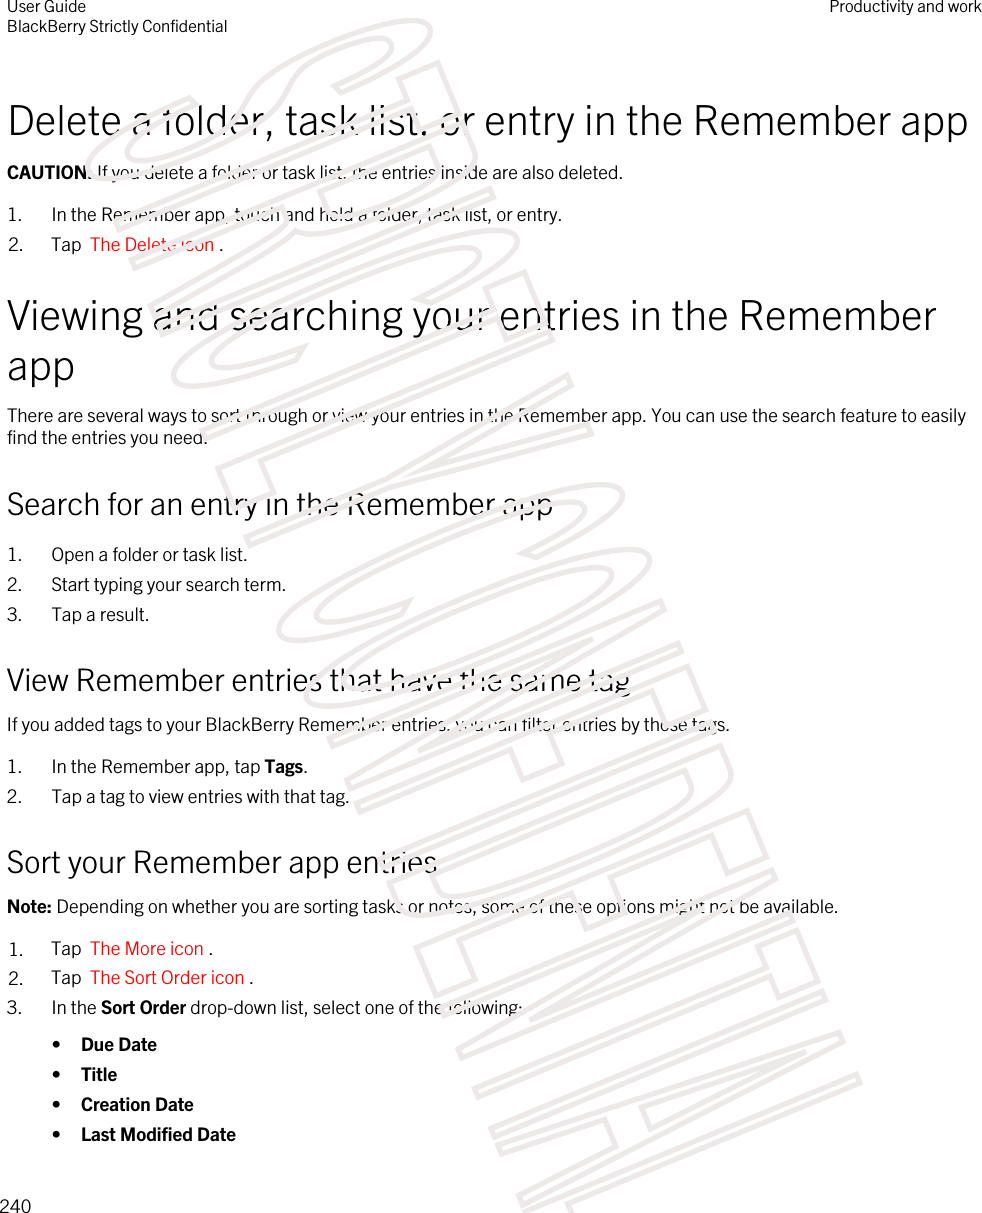 Delete a folder, task list, or entry in the Remember appCAUTION: If you delete a folder or task list, the entries inside are also deleted.1. In the Remember app, touch and hold a folder, task list, or entry.2. Tap  The Delete icon .Viewing and searching your entries in the Remember appThere are several ways to sort through or view your entries in the Remember app. You can use the search feature to easily find the entries you need.Search for an entry in the Remember app1. Open a folder or task list.2. Start typing your search term.3. Tap a result.View Remember entries that have the same tagIf you added tags to your BlackBerry Remember entries, you can filter entries by those tags.1. In the Remember app, tap Tags.2. Tap a tag to view entries with that tag.Sort your Remember app entriesNote: Depending on whether you are sorting tasks or notes, some of these options might not be available.1. Tap  The More icon . 2. Tap  The Sort Order icon .3. In the Sort Order drop-down list, select one of the following:•Due Date•Title•Creation Date•Last Modified DateUser GuideBlackBerry Strictly Confidential Productivity and work240STRICTLY CONFIDENTIAL